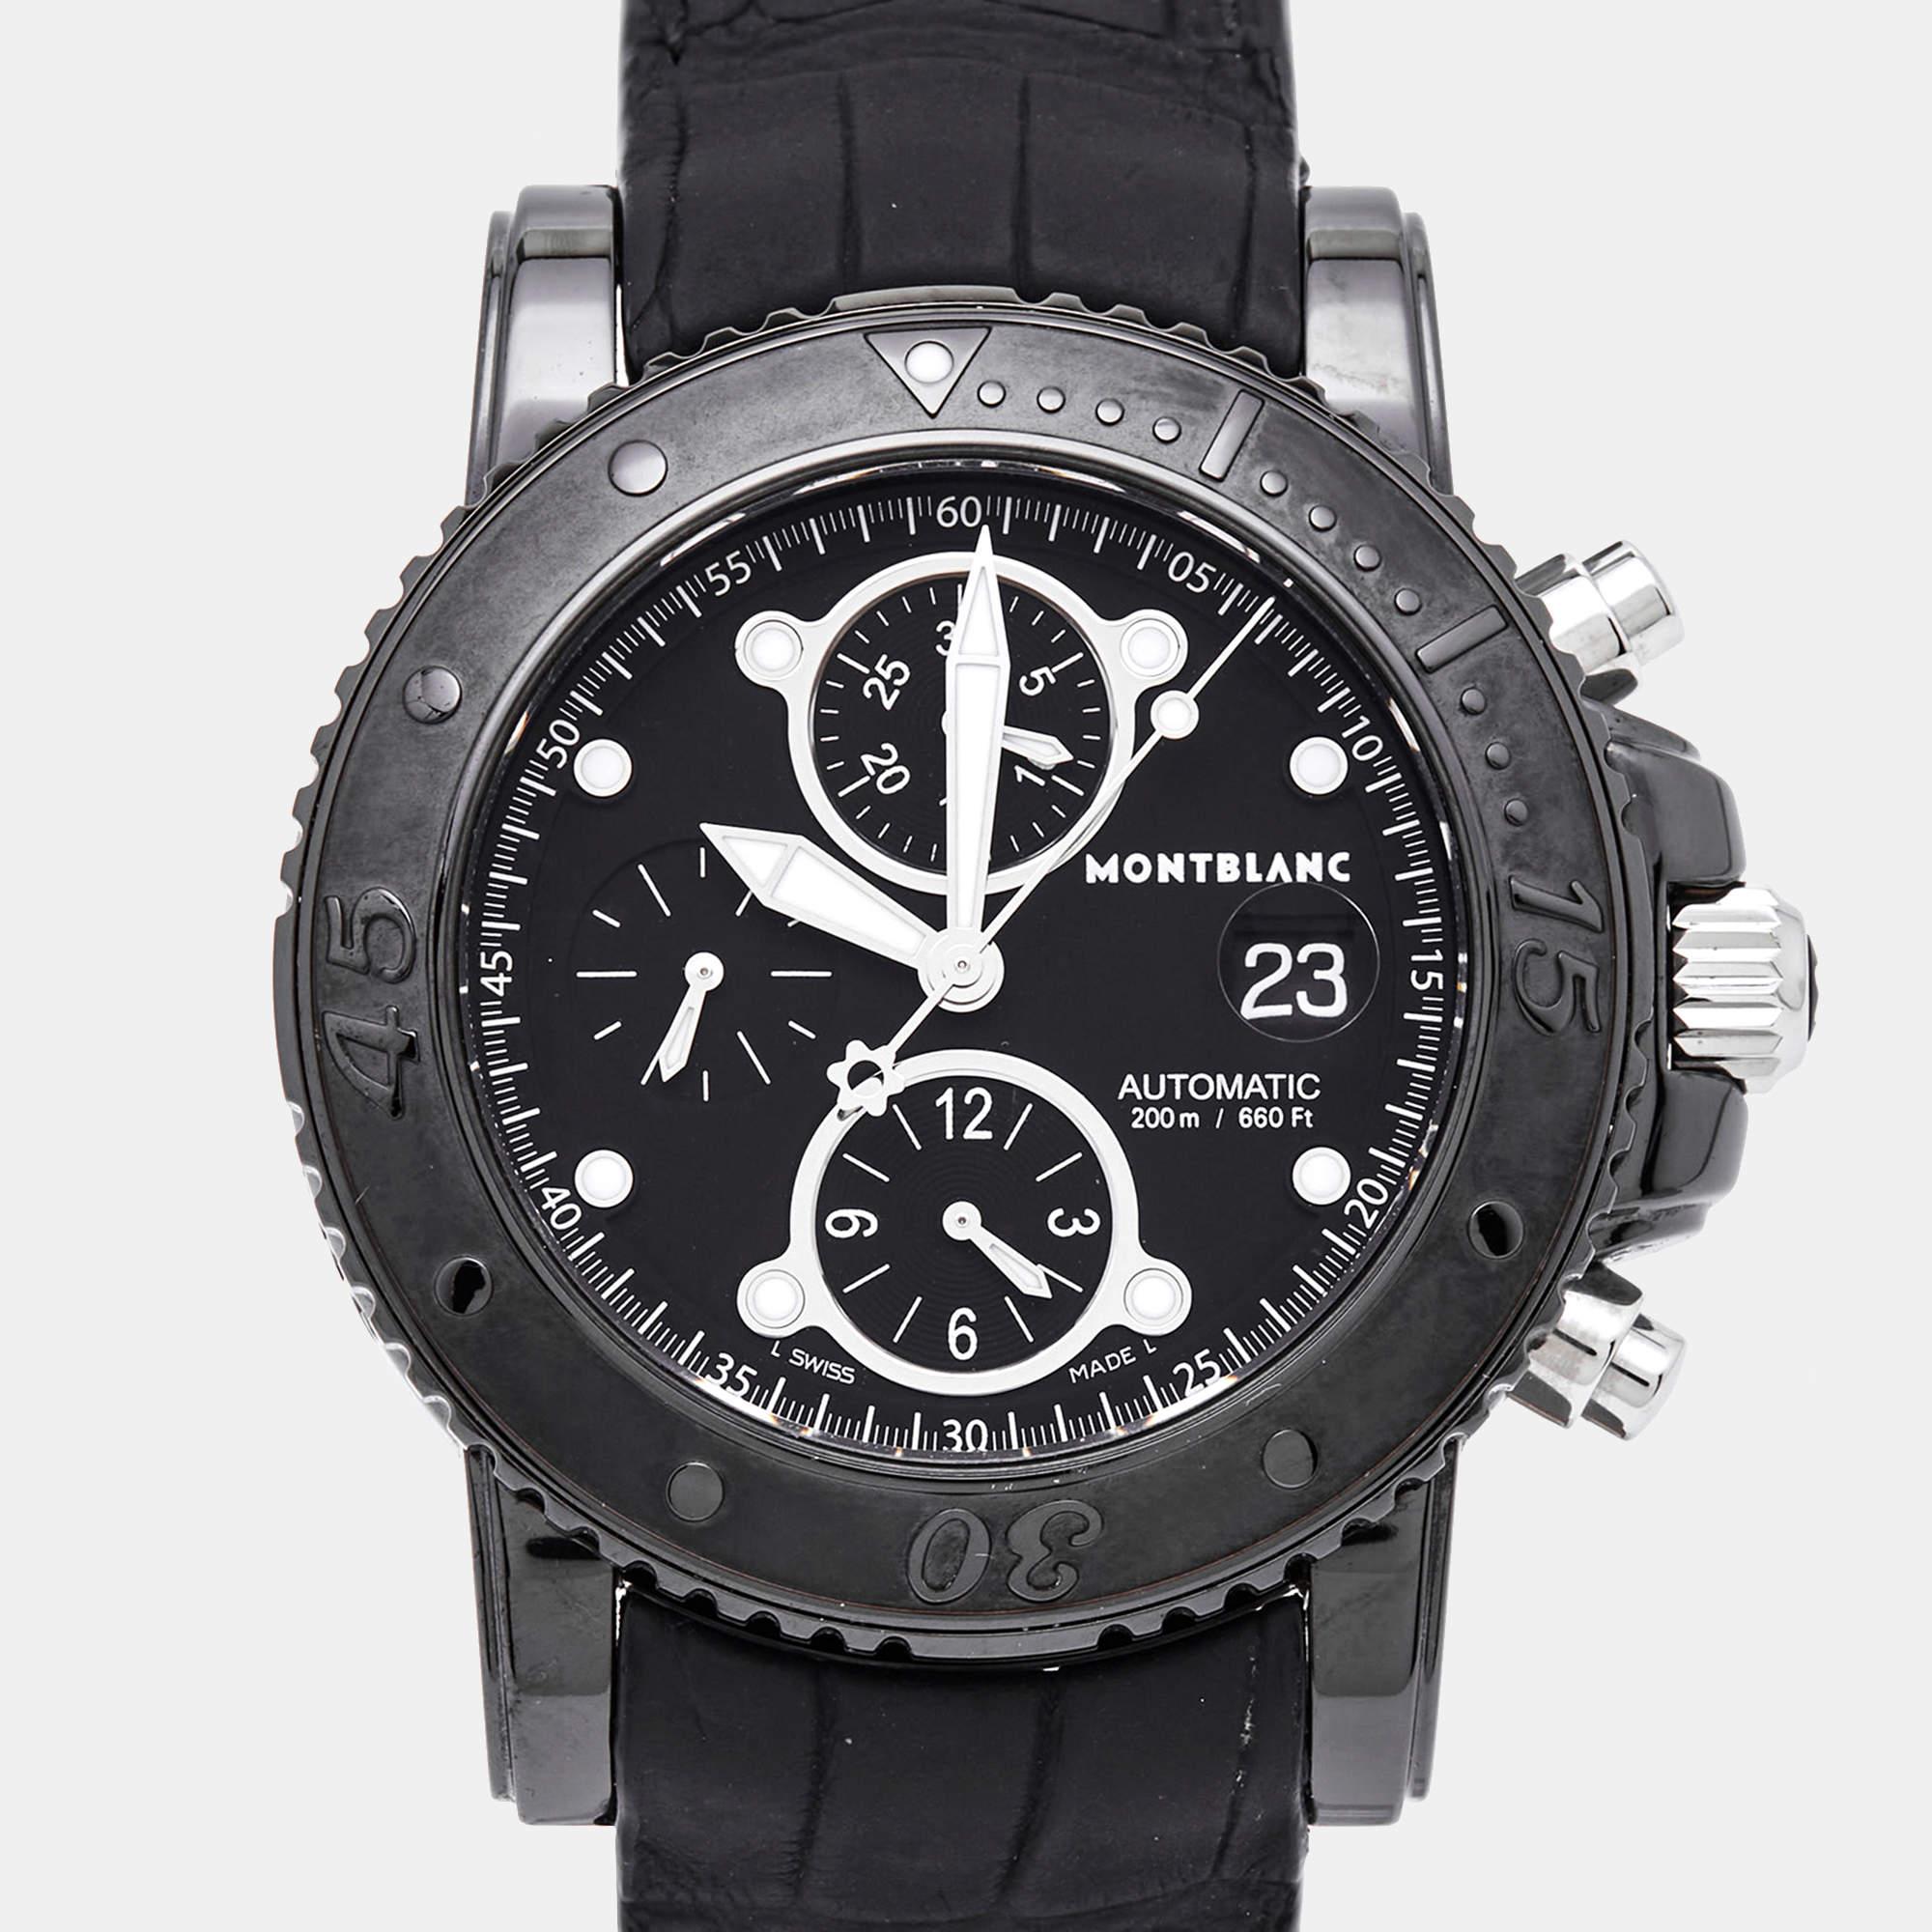 Aesthetic Movement Montblanc Black PVD Coated Alligator Leather Sport 104279 Men's Wristwatch 44 mm For Sale